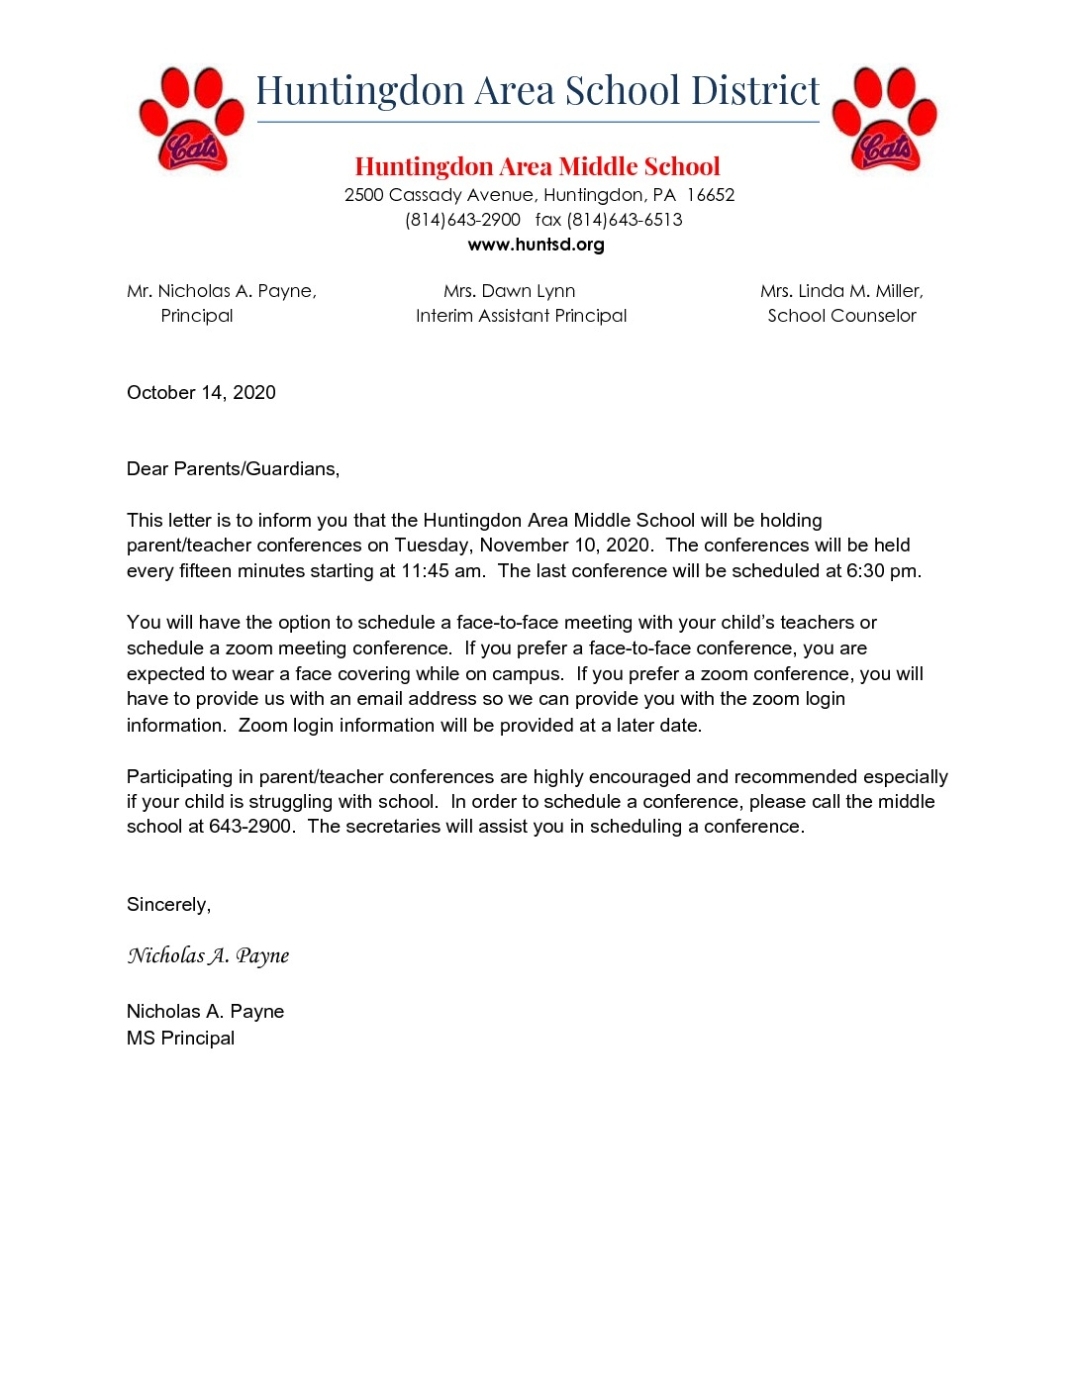 Parent Teacher Conference Letter (20 21) – Huntingdon Area School District Pertaining To Letters To Parents From Teachers Templates